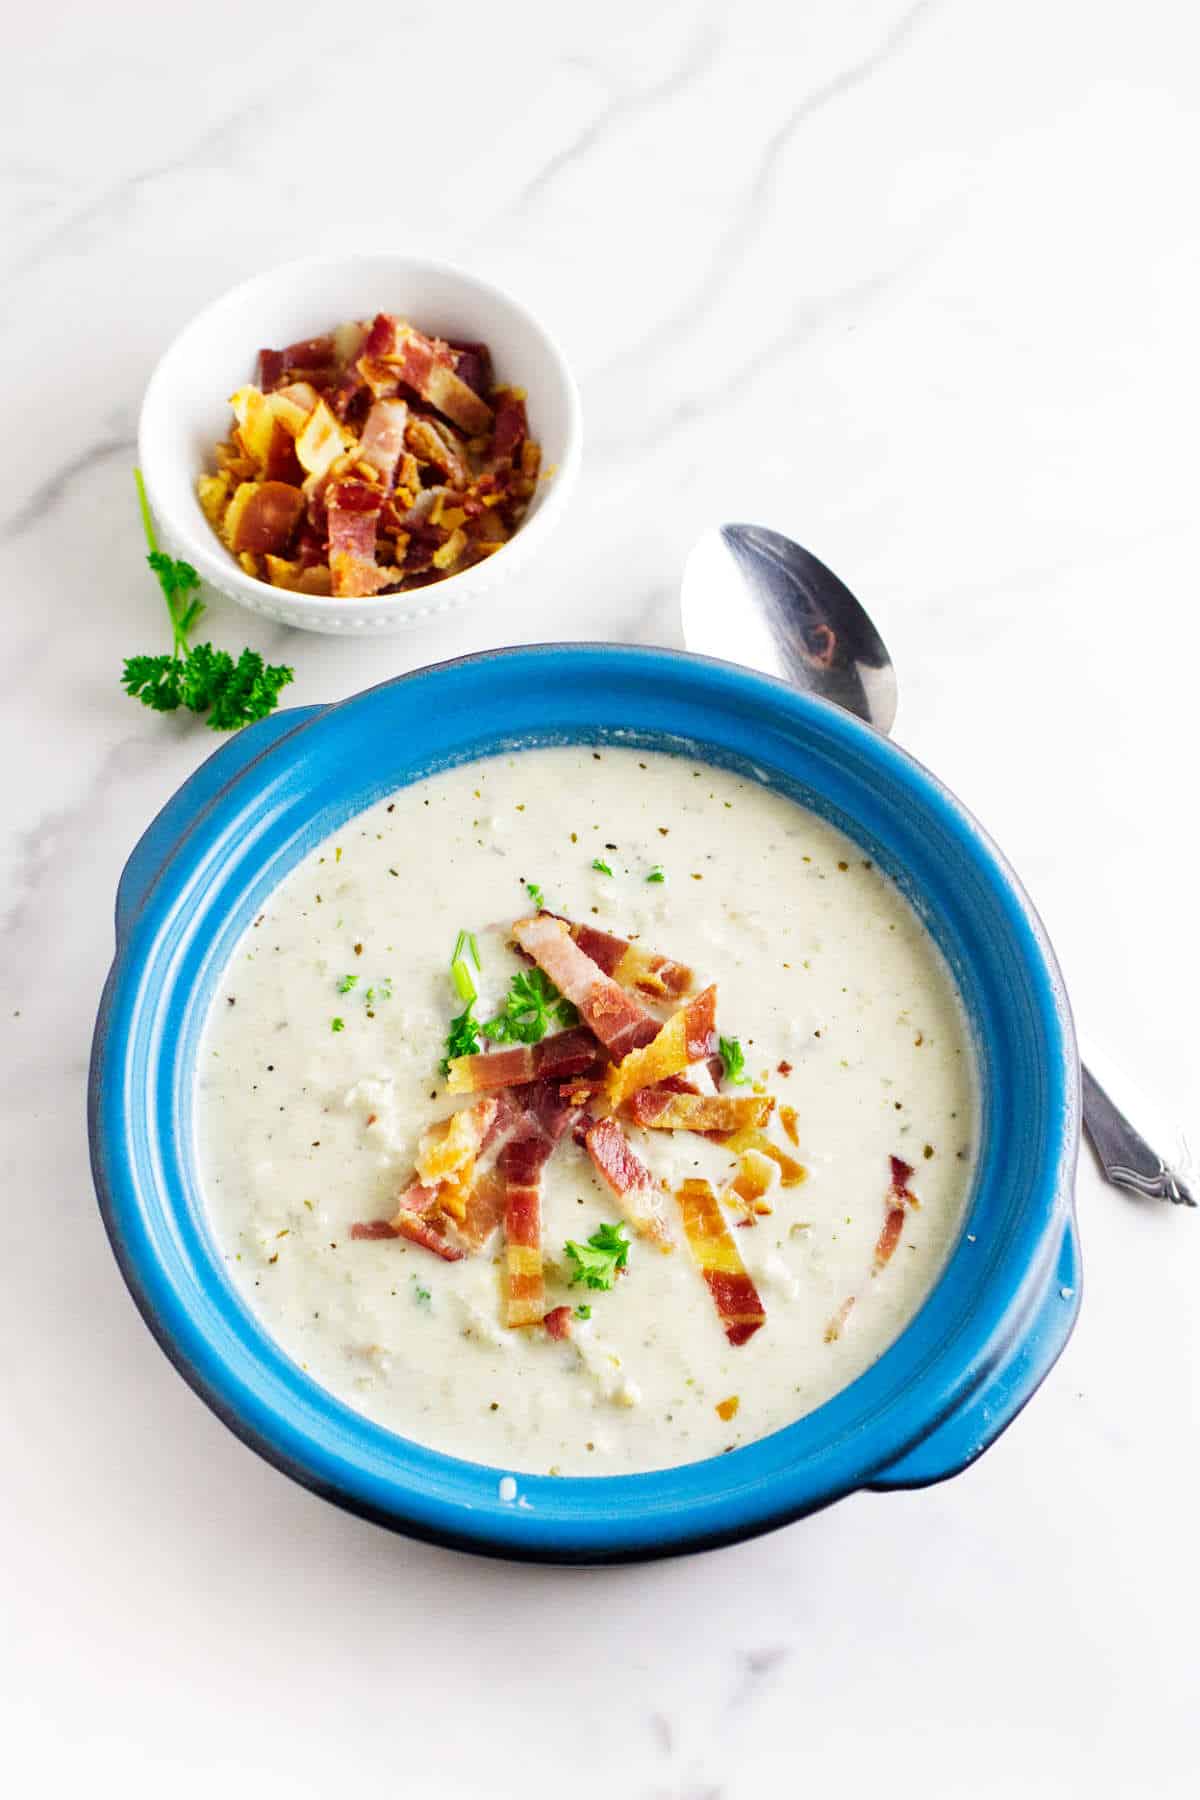 Mock potato soup (celery root soup) with bacon and parsley garnish in a soup bowl.